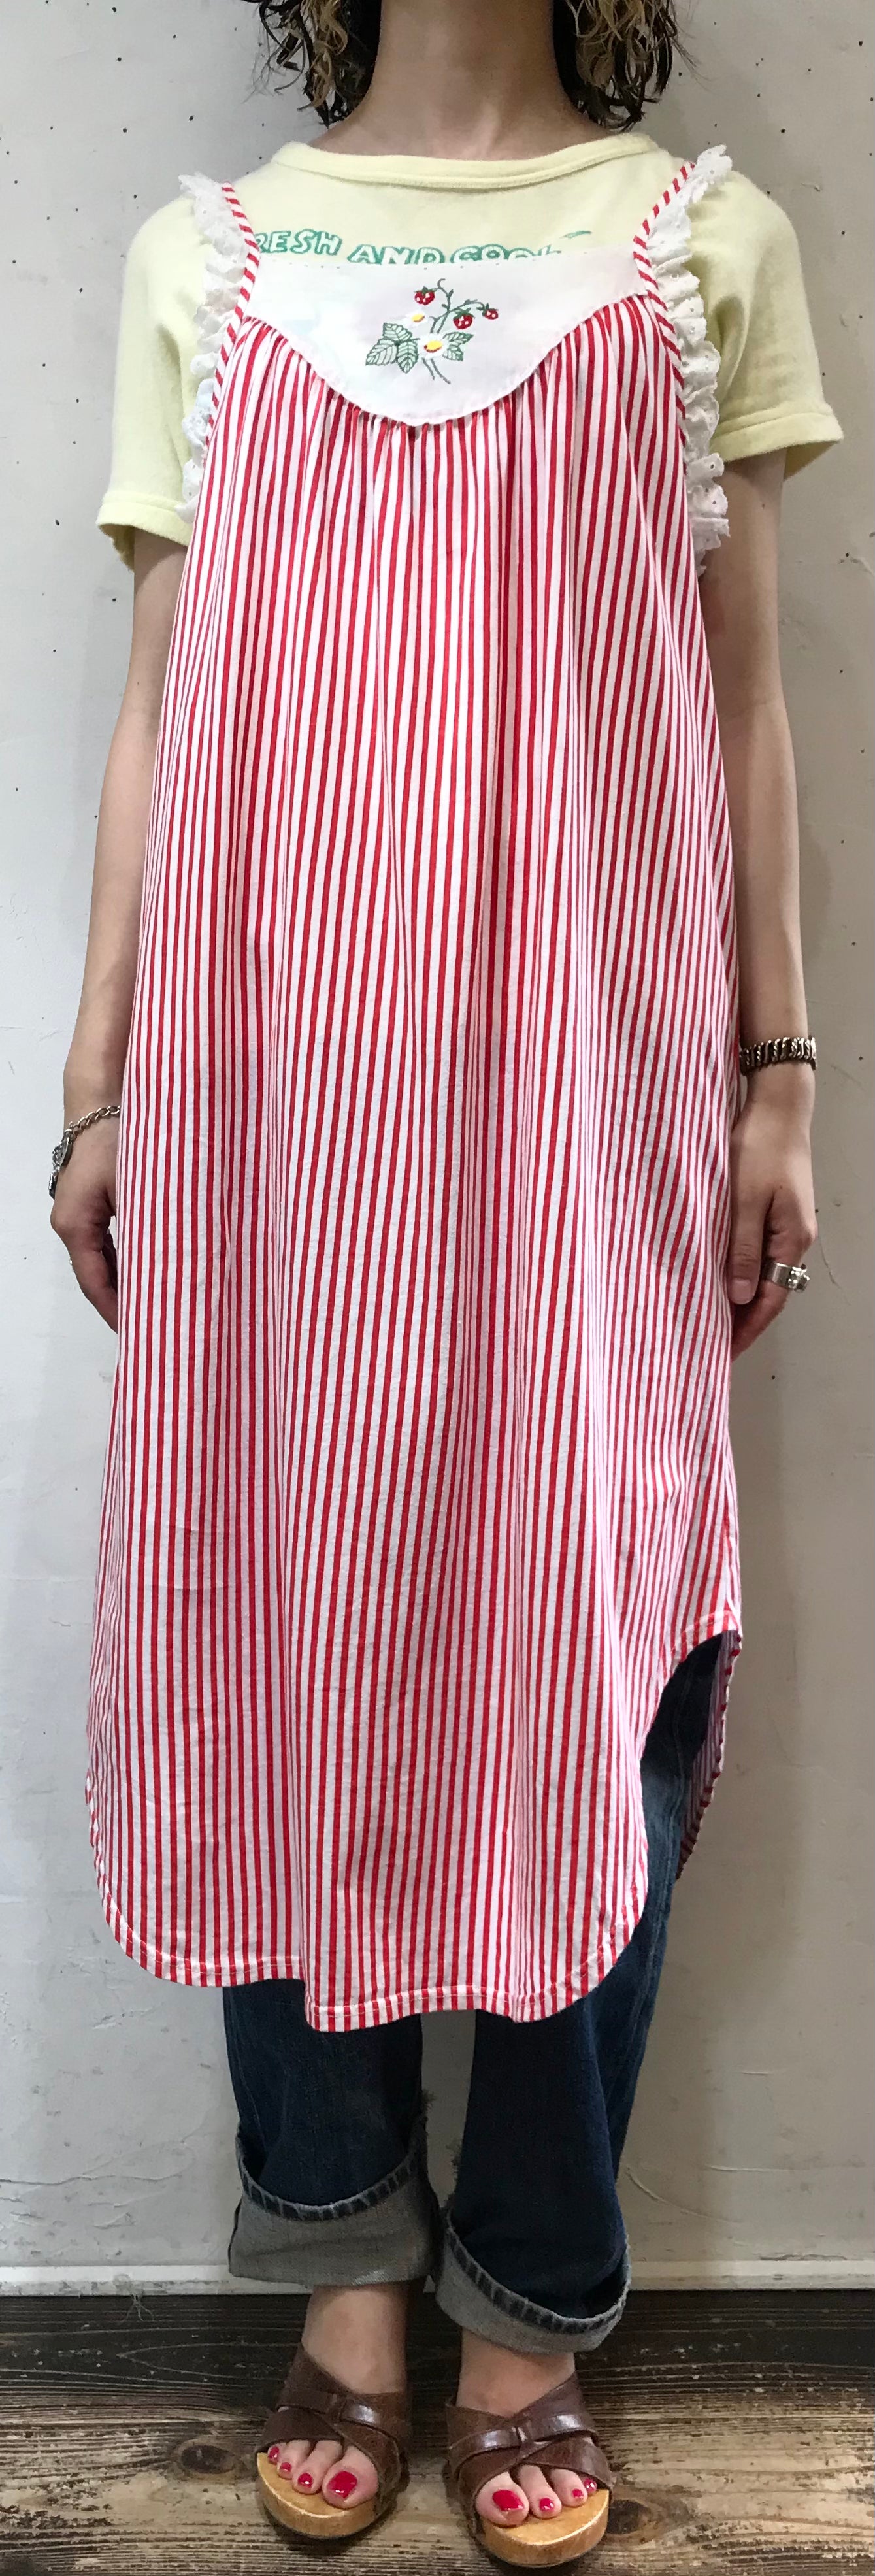 Vintage Camisole Dress MADE IN W. Germany [G24566]